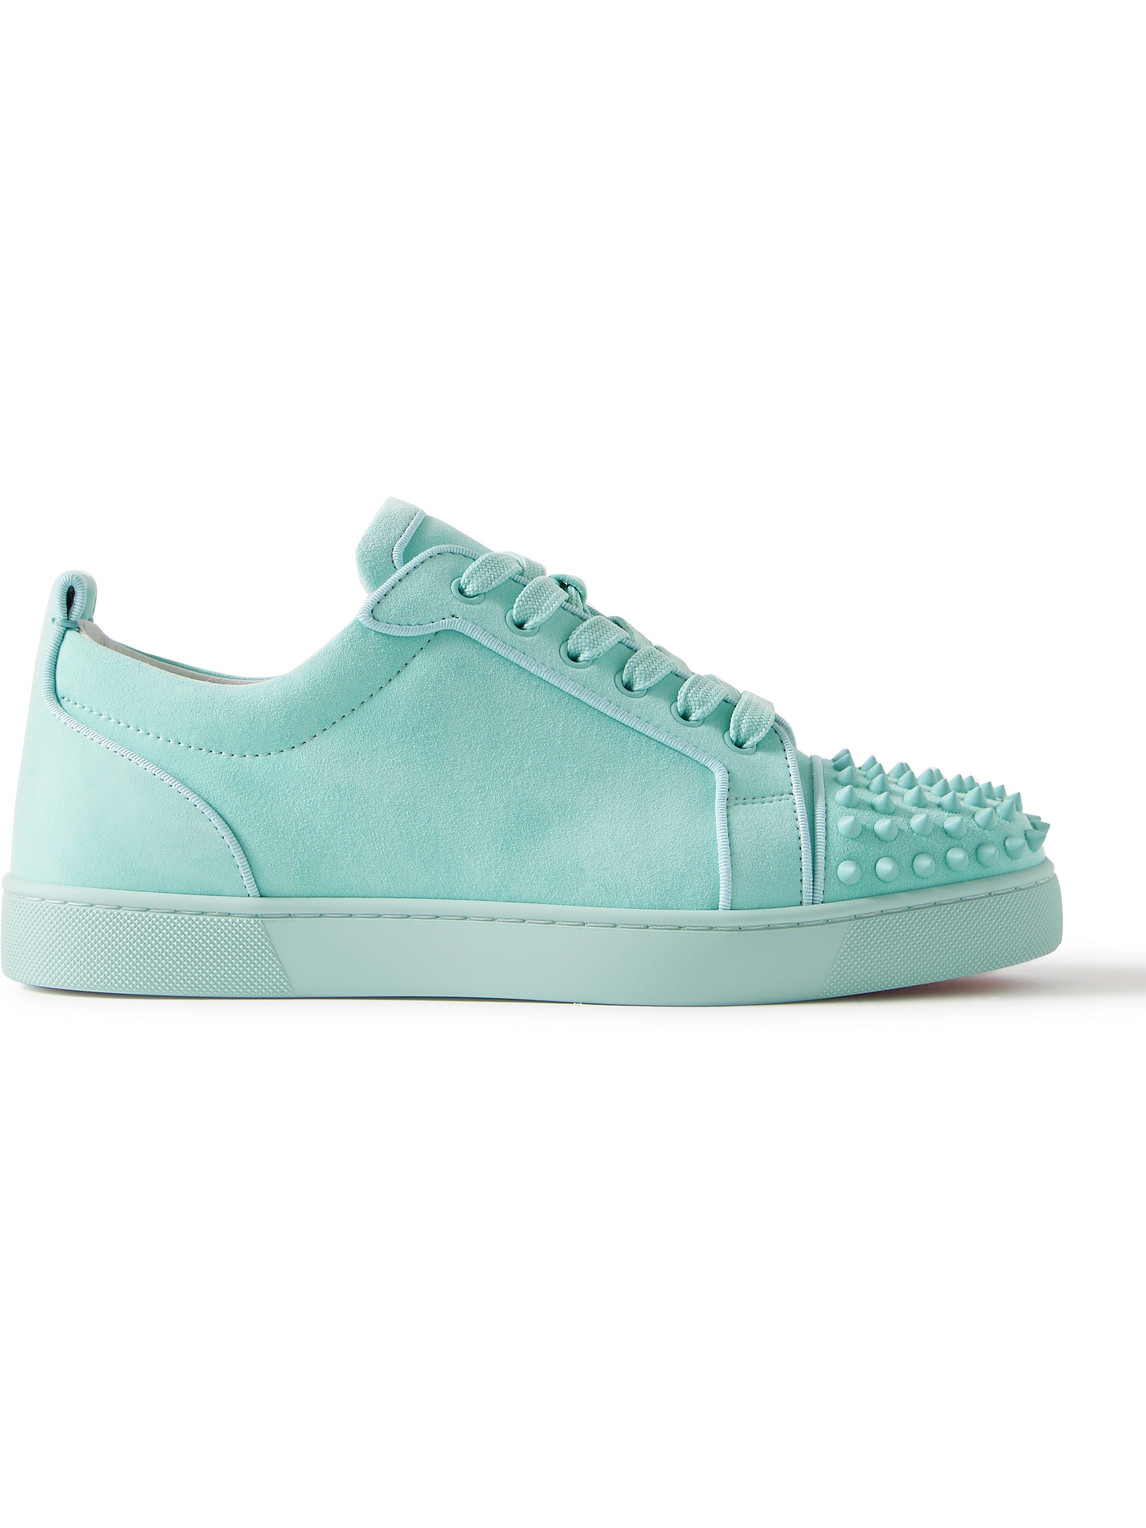 Christian Louboutin Louis Junior Spiked Suede Trainers In Blue